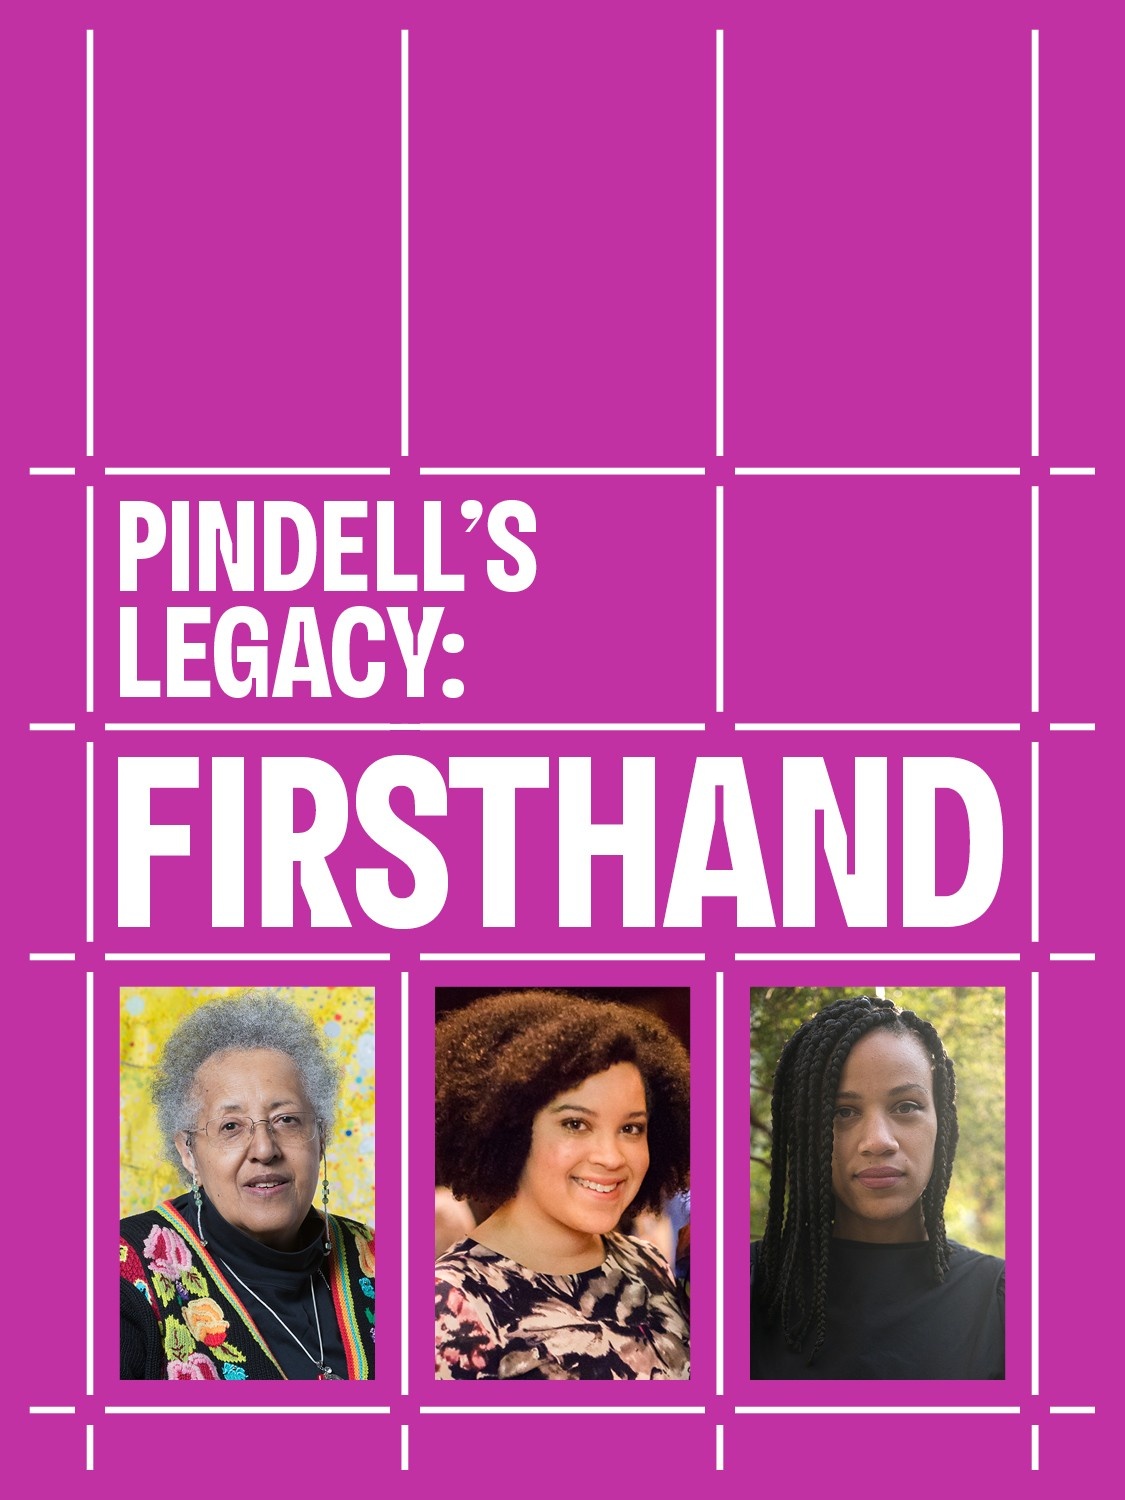 Photos of Howardena Pindell, Adeze Wilford, and Ashely James set in a grid pattern with the words Pindell's Legacy: Firsthand above the images